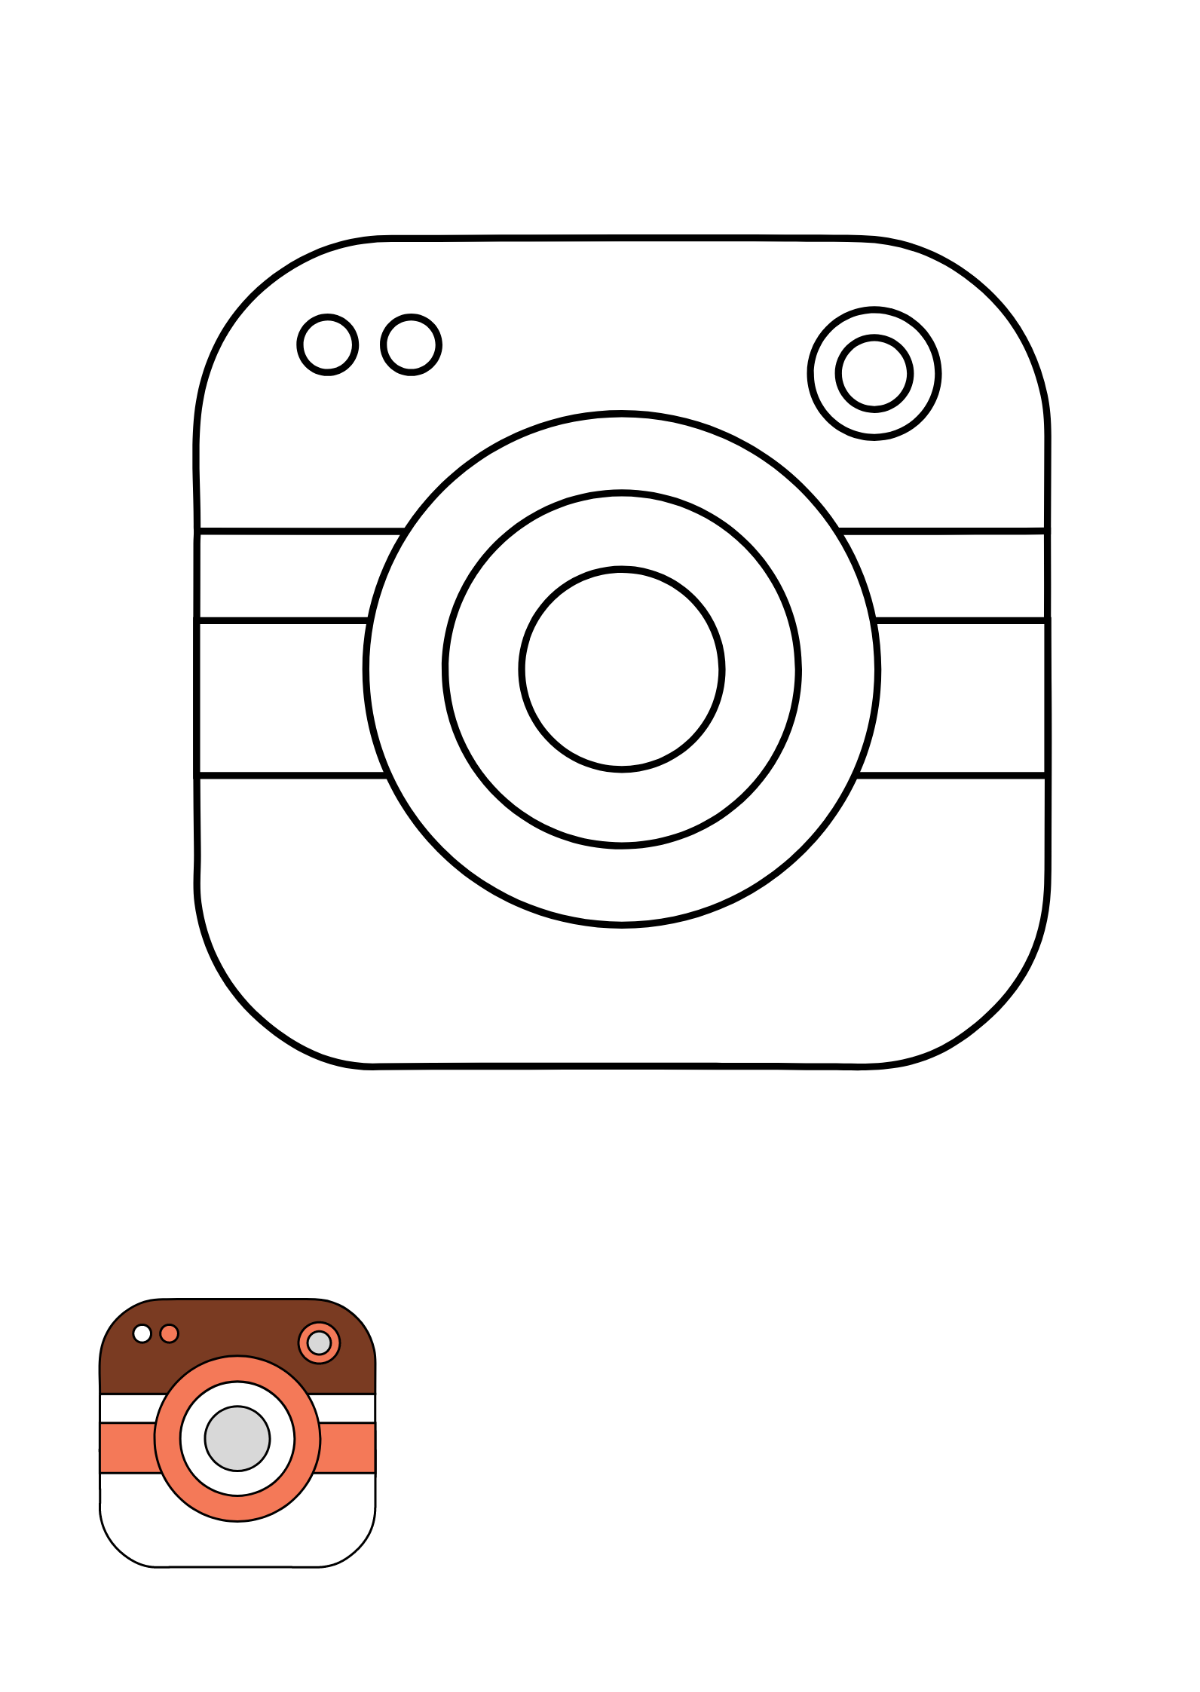 Instagram Camera Coloring Page Template